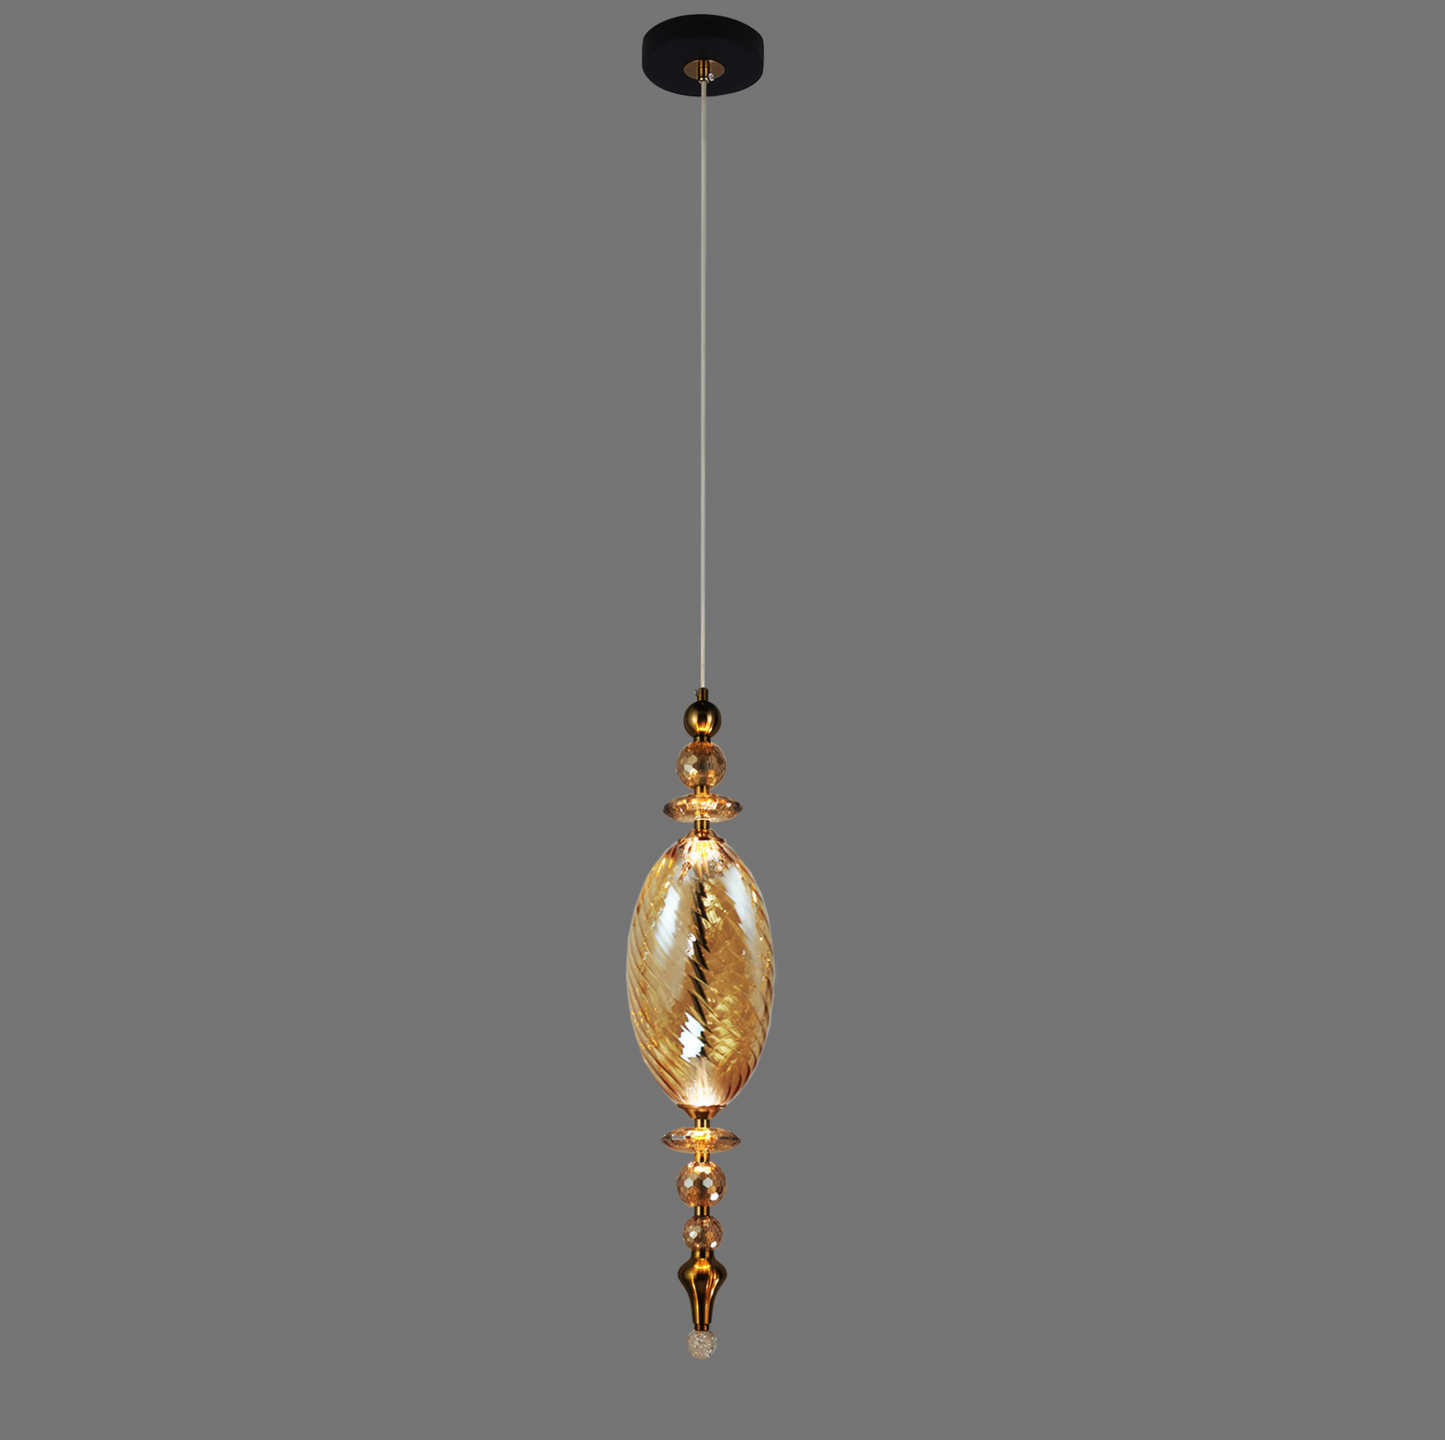 Luxury Amber and Smokey Crystal LED Pendant Light by Gloss (A1933/A/A3)